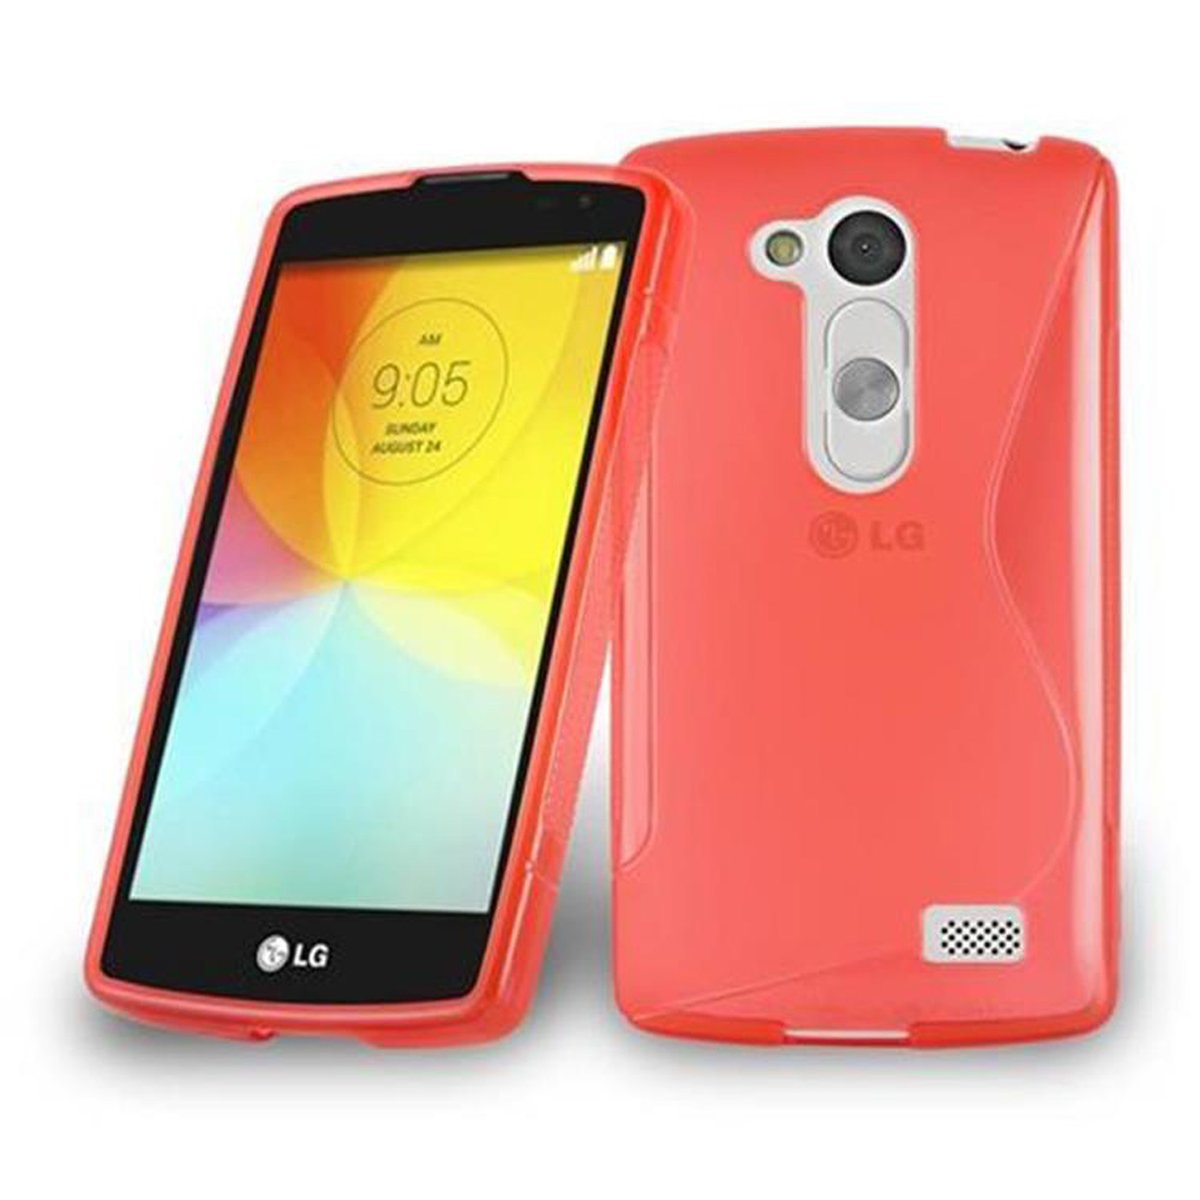 ROT Backcover, TPU Handyhülle, L FINO, LG, INFERNO CADORABO S-Line